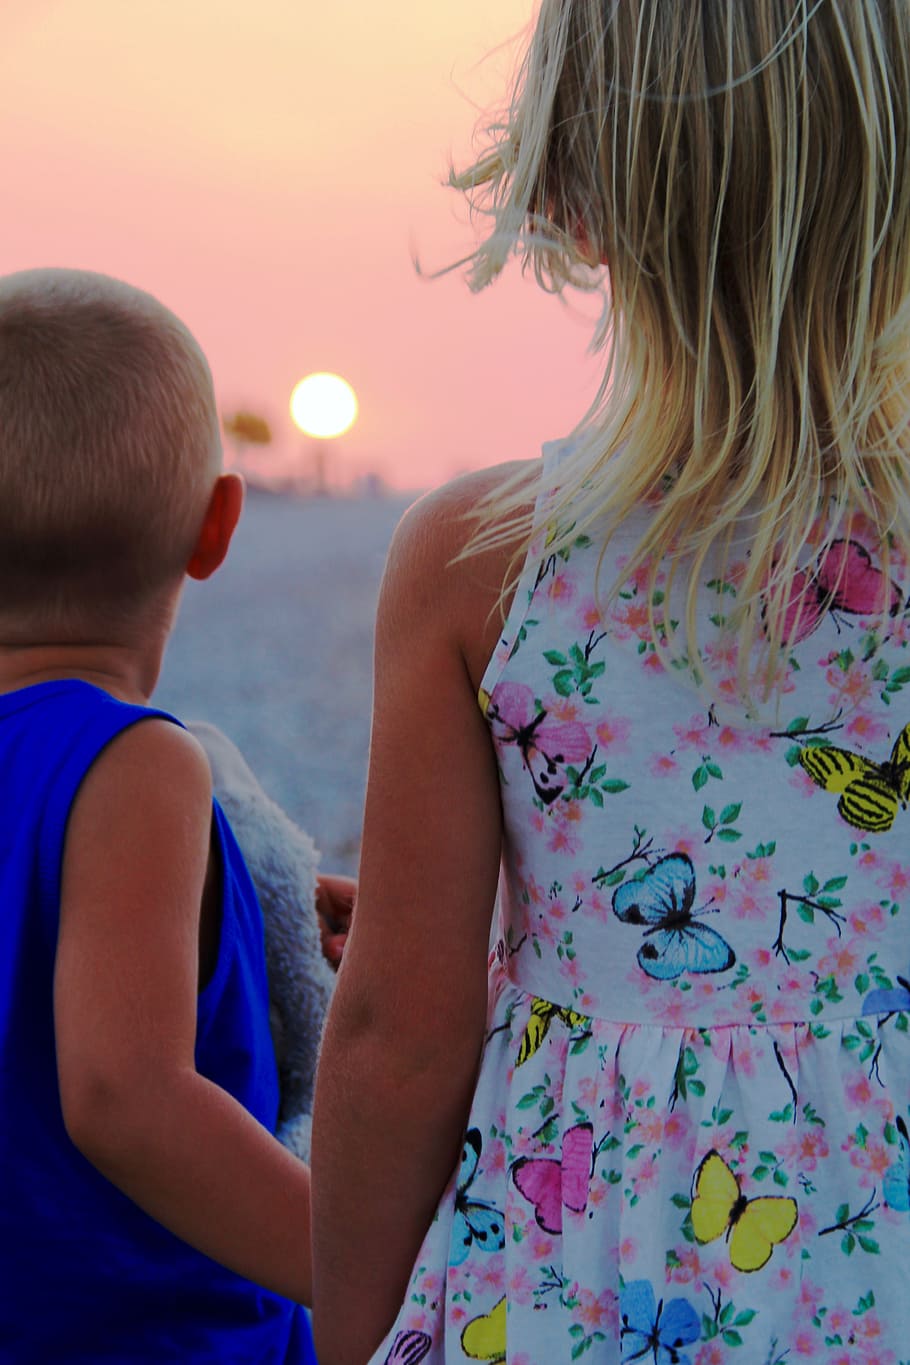 Siblings, Sunset, Child, Nature, happy, family, girl, boy, summer.